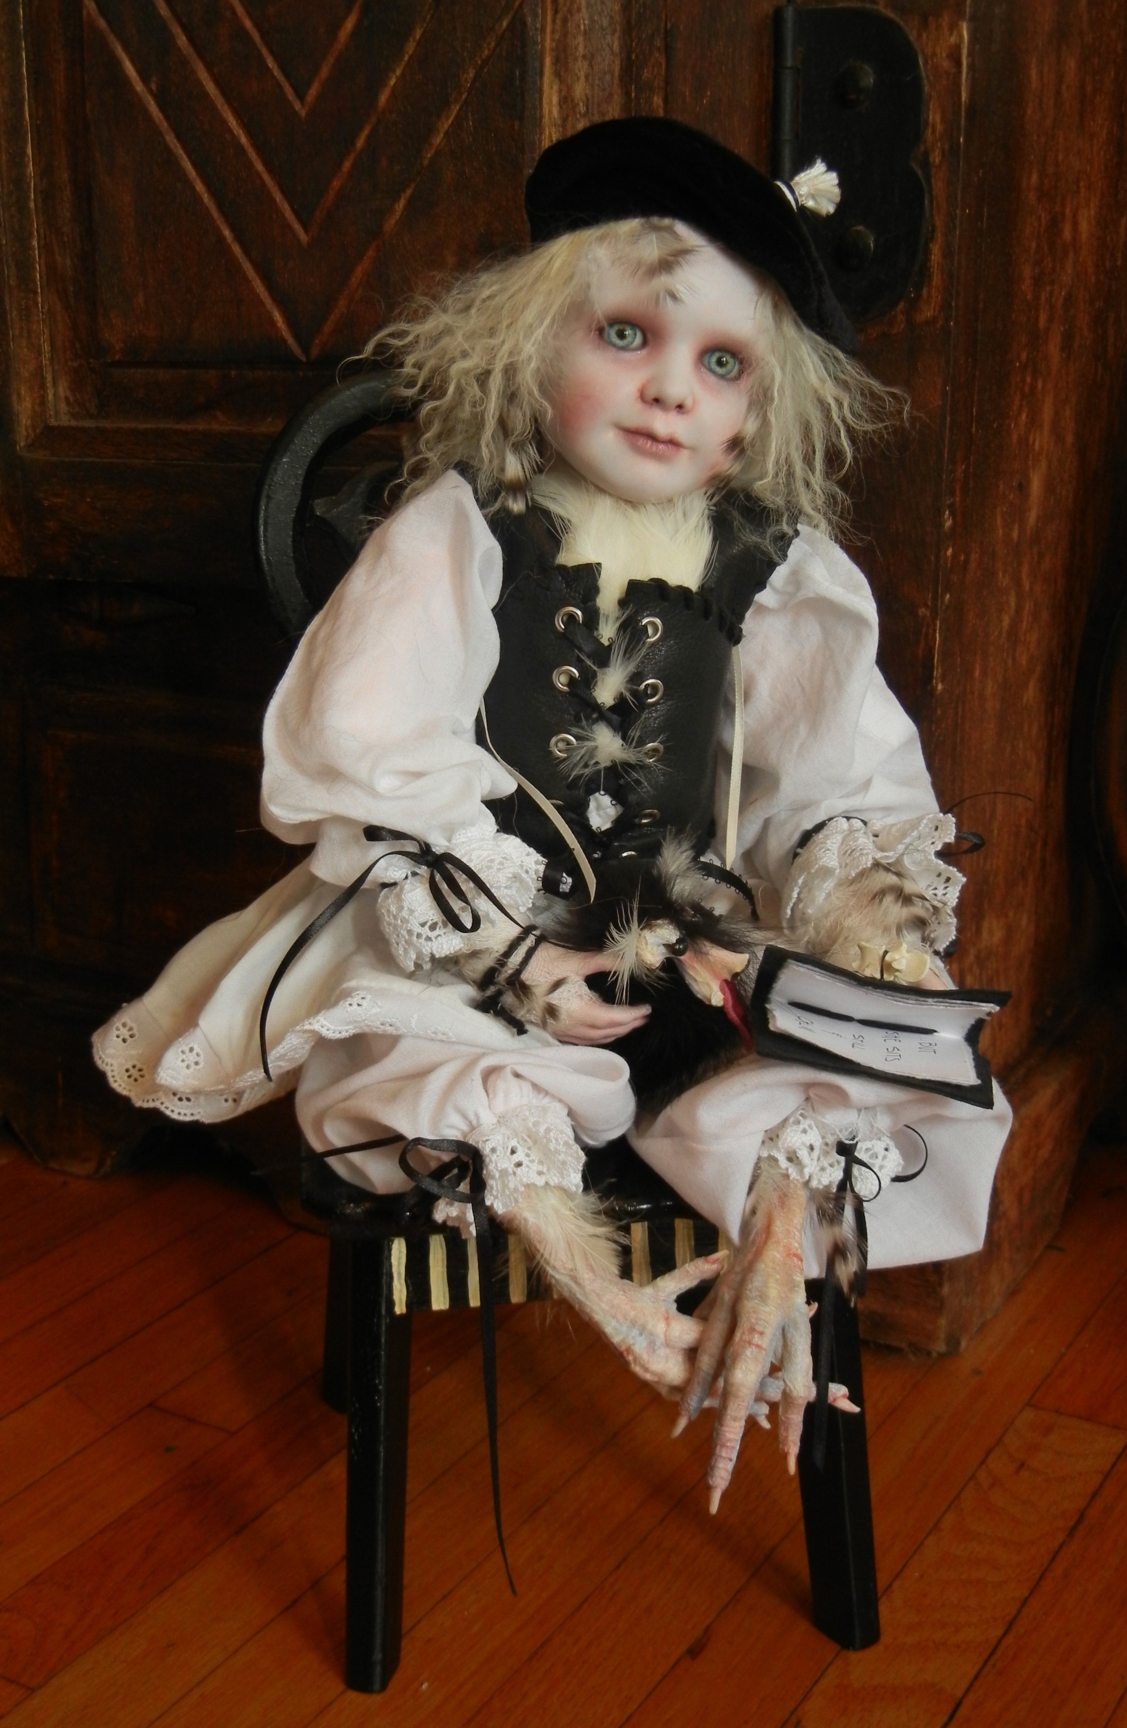 seated gothic artdoll pale with light eyes and blond hair wearing black beret, white shirt with lace cuffs, black leather vest, taxidermy chicken feet holds a feathered pet creature in his lap